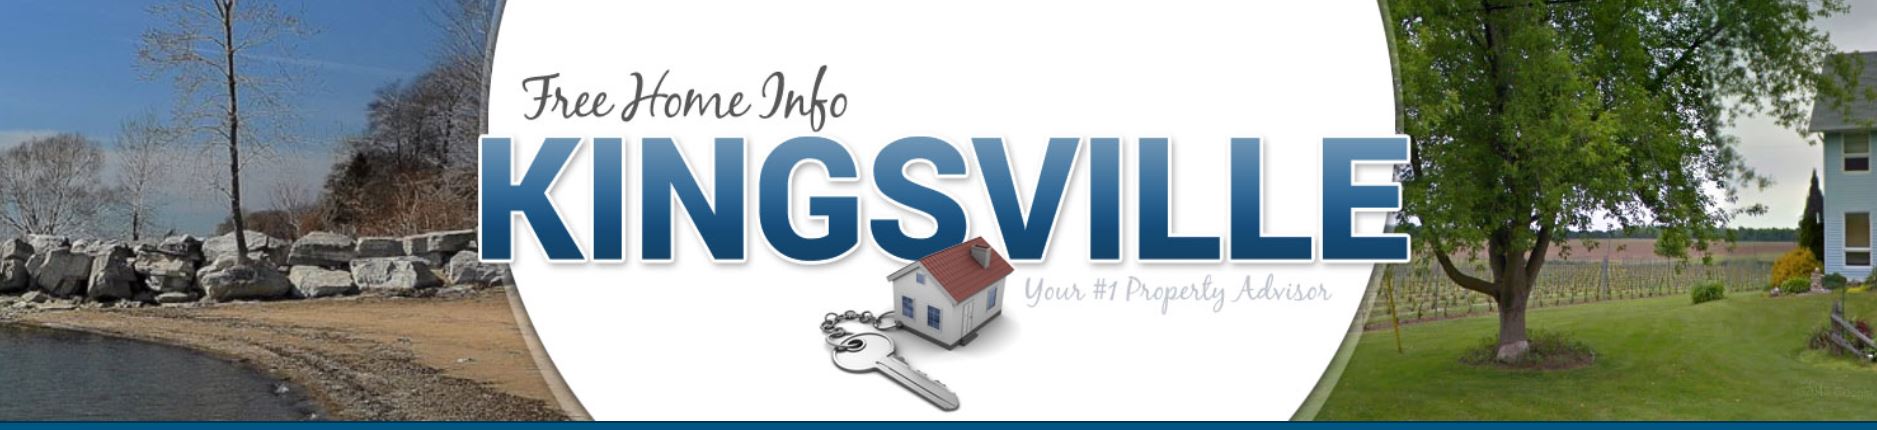 Discovering Kingsville Ontario and it's Real Estate Market.  Important information and tips for Buyers and Sellers by real estate agent Ron Klingbyle specializing in Kingsville Ontario real estate.  